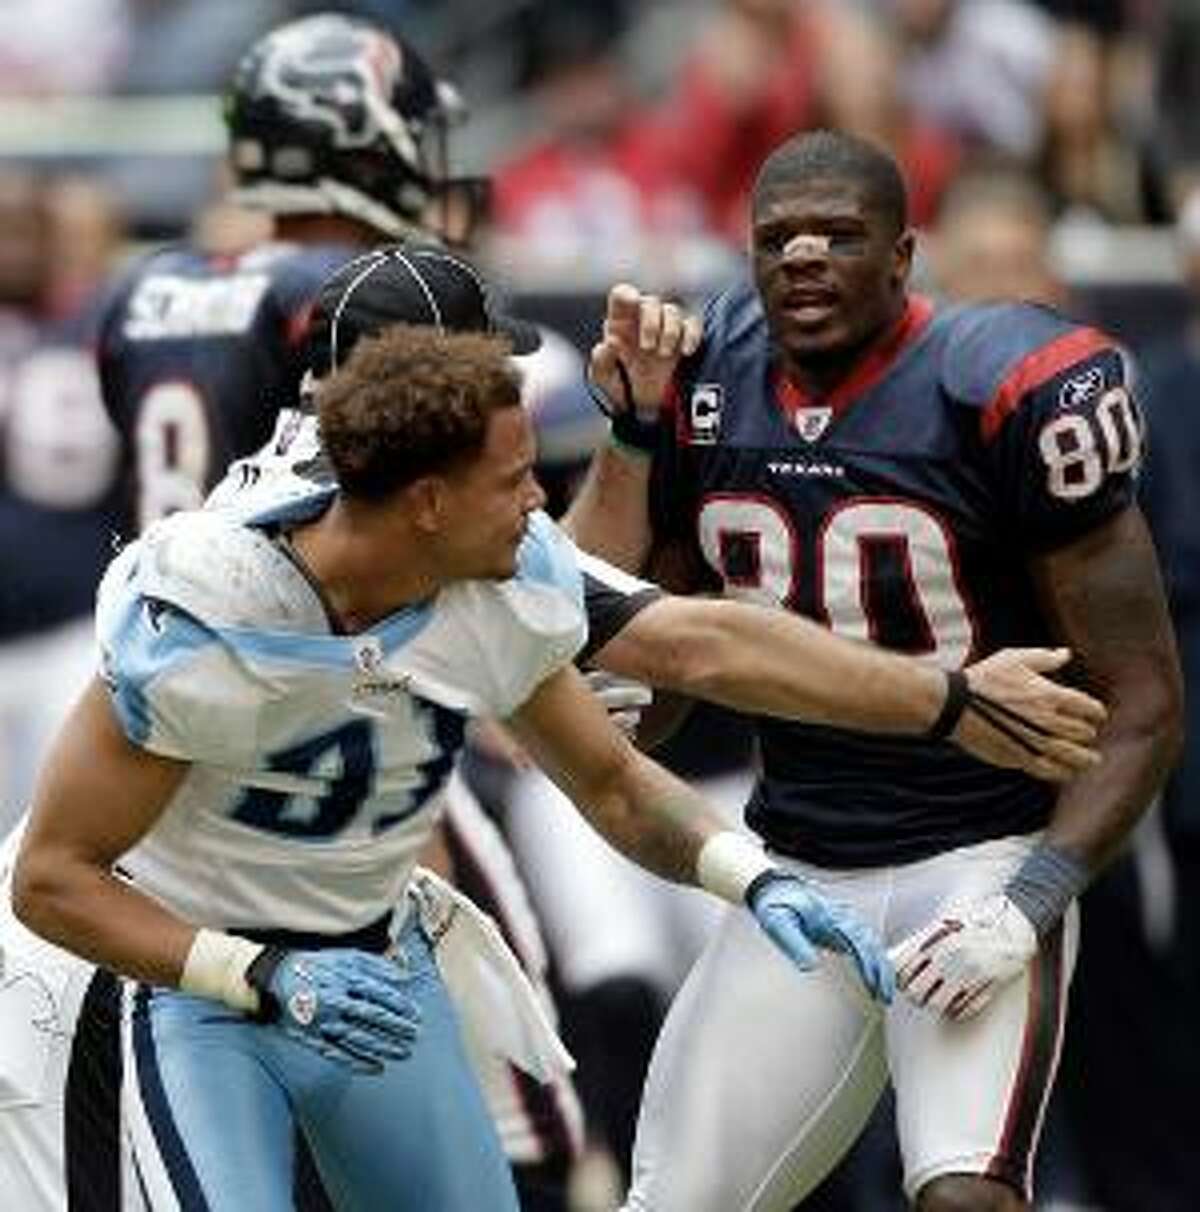 WEB FIRST: Houston Texans WR Andre Johnson and Tennessee Titans cornerback  Cortland Finnegan fight during game; Texans win 22-0